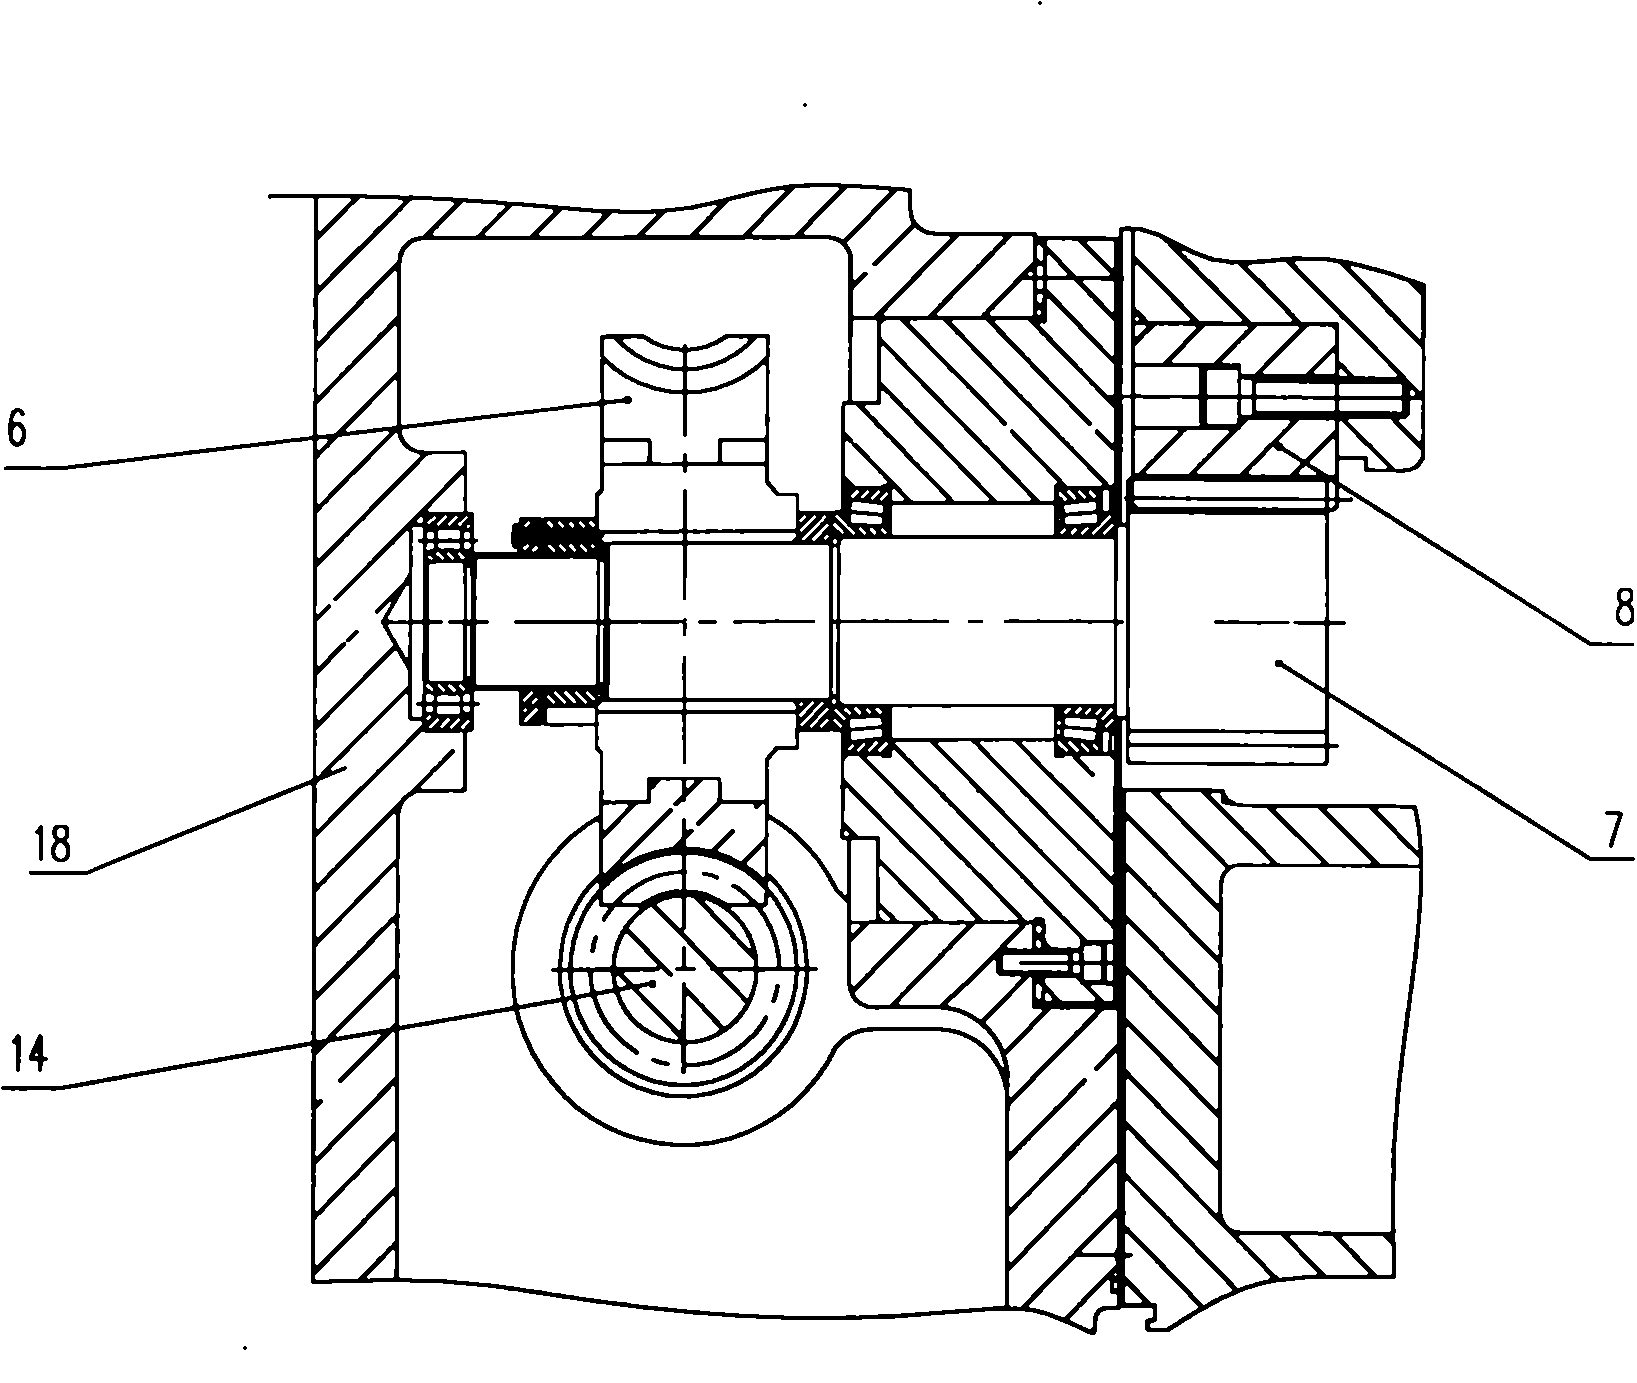 Swivel table driving device with double worm and gear backlash mechanisms